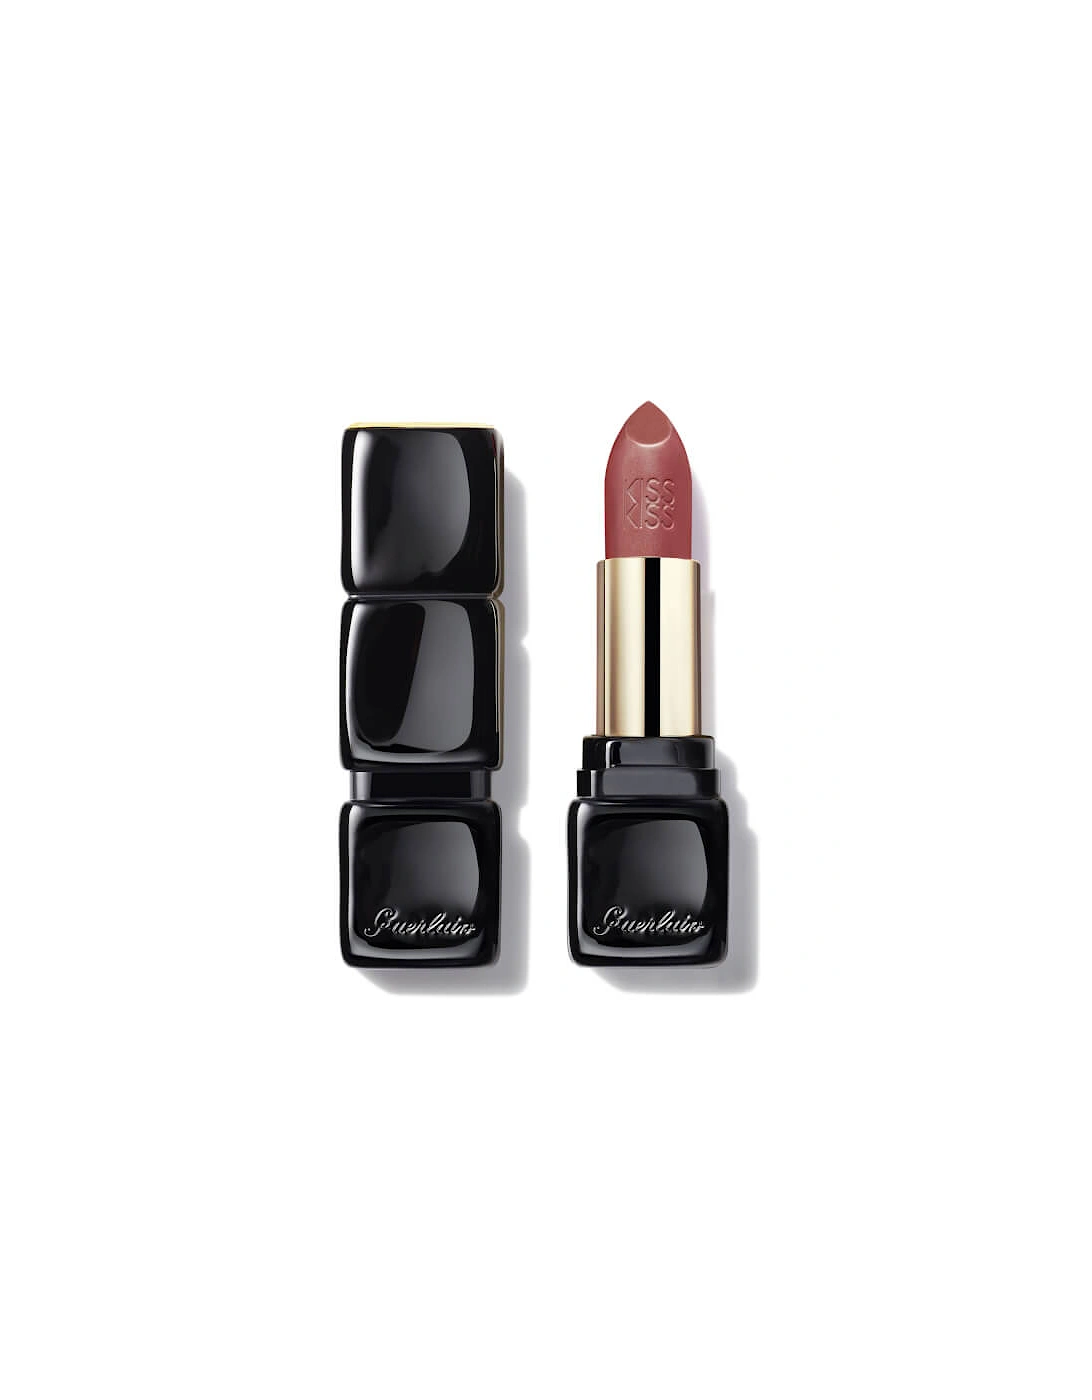 Kisskiss Shaping Cream Lip Colour - 320 Red Insolence, 2 of 1